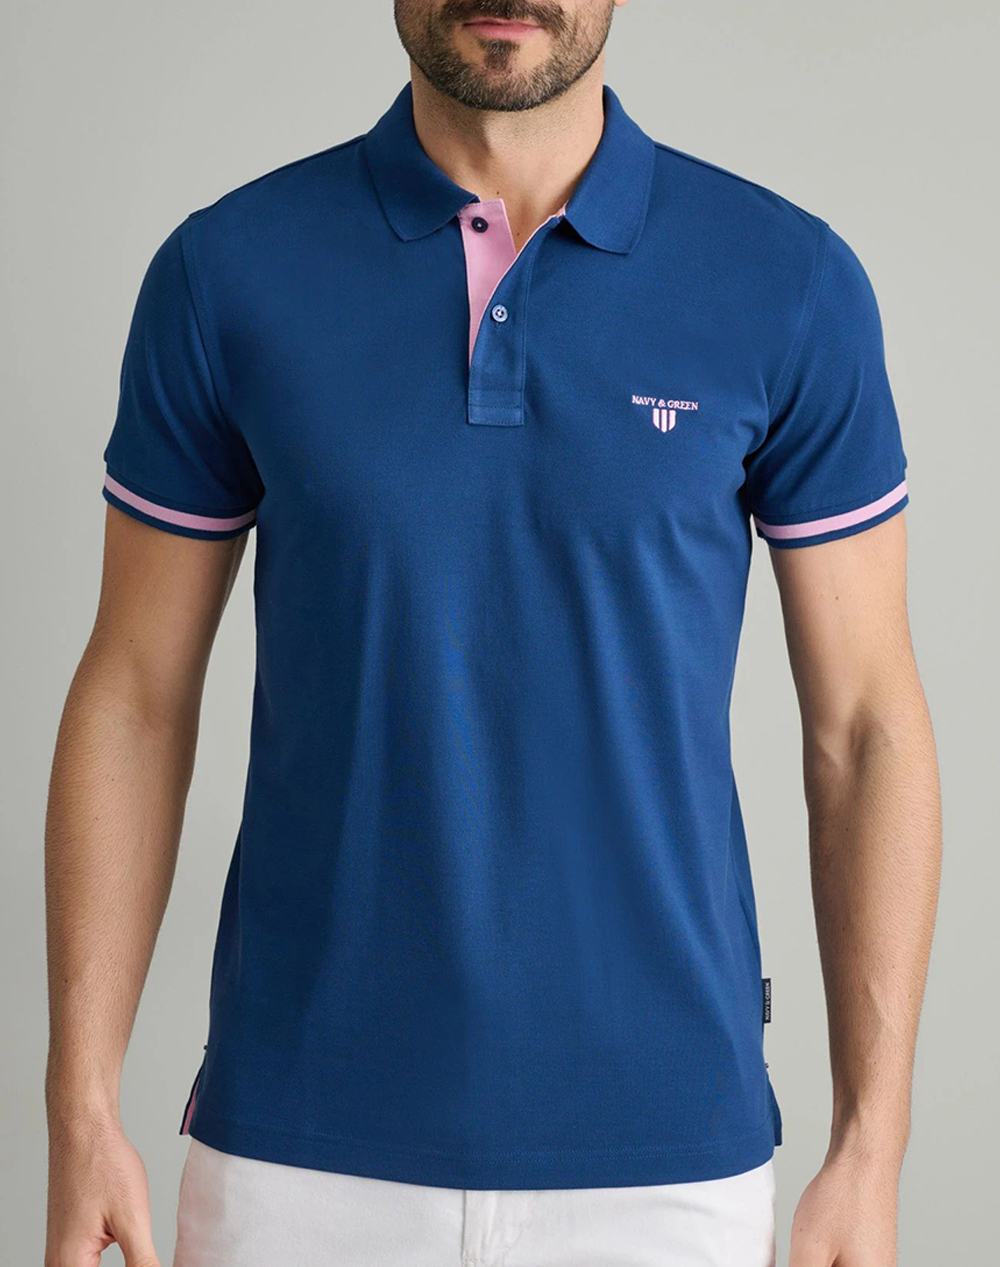 NAVY&GREEN POLO ΜΠΛΟΥΖΑΚΙ-YOUNG LINE 24GE.879/YL.2-Atlantic Blue Blue